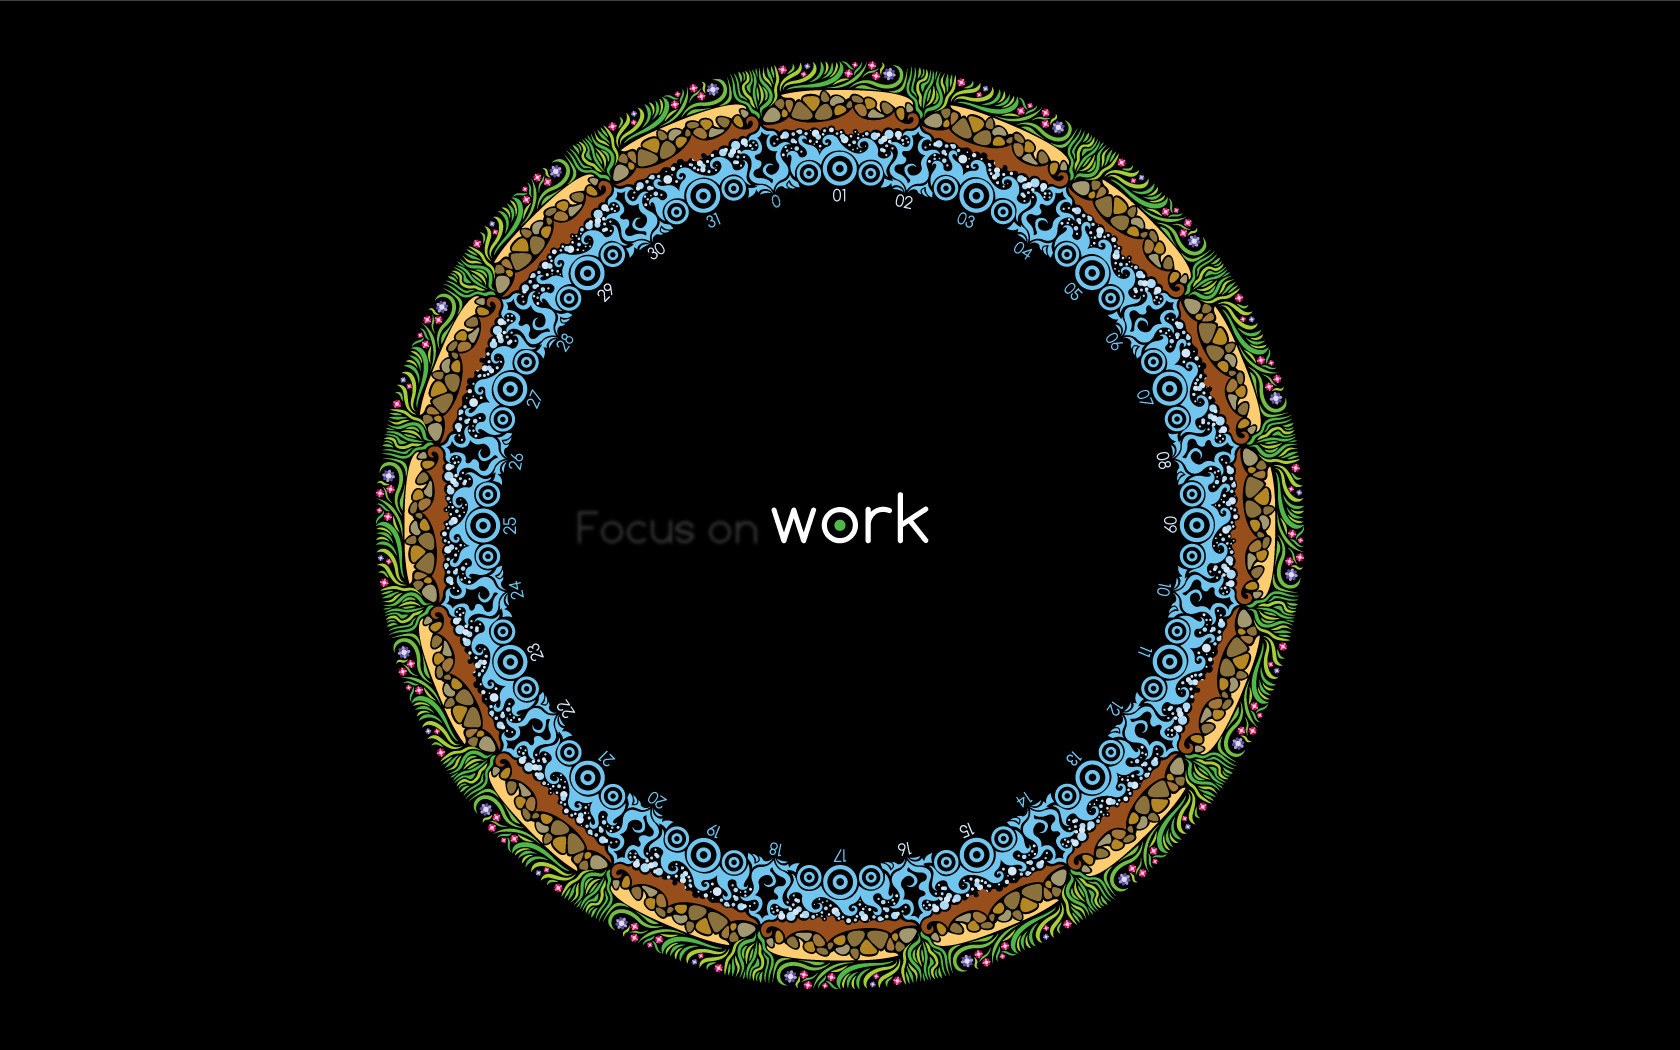 Abstract Focus On Work Clock With Flowerish Pattern Wallpaper